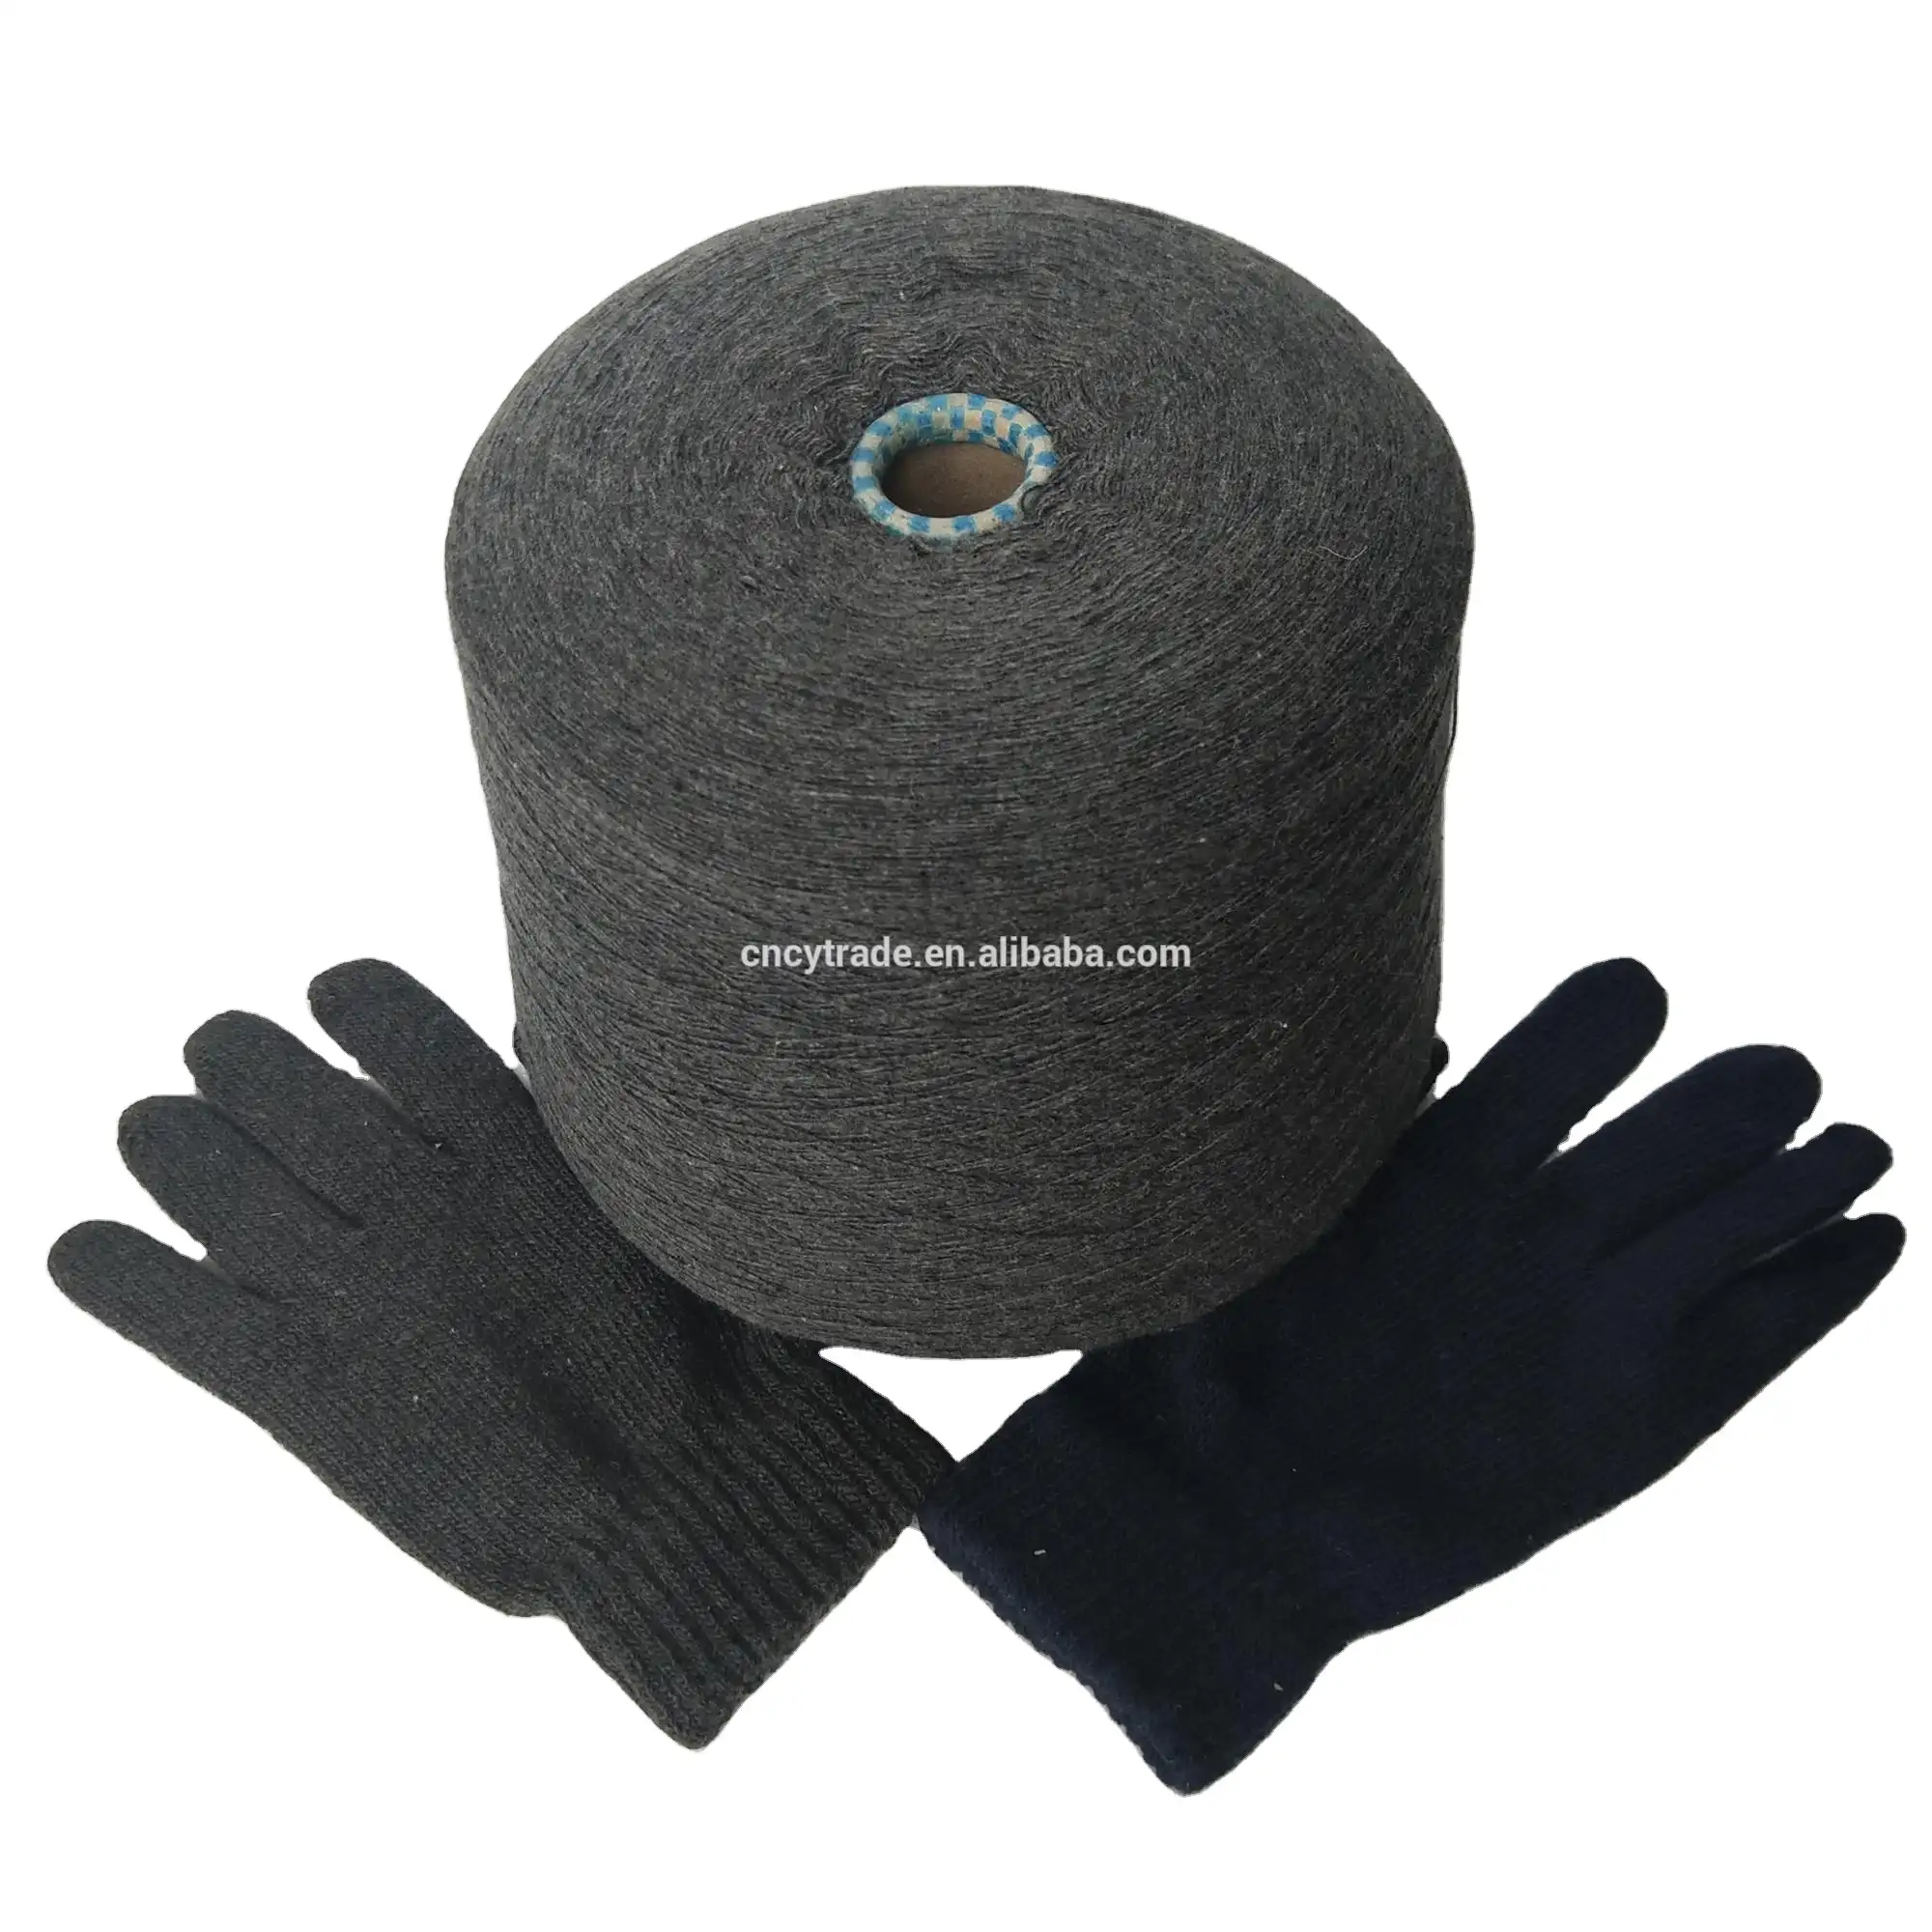 Cotton polyester blended recycled glove yarn for knitting PVC gloves or cotton gloves